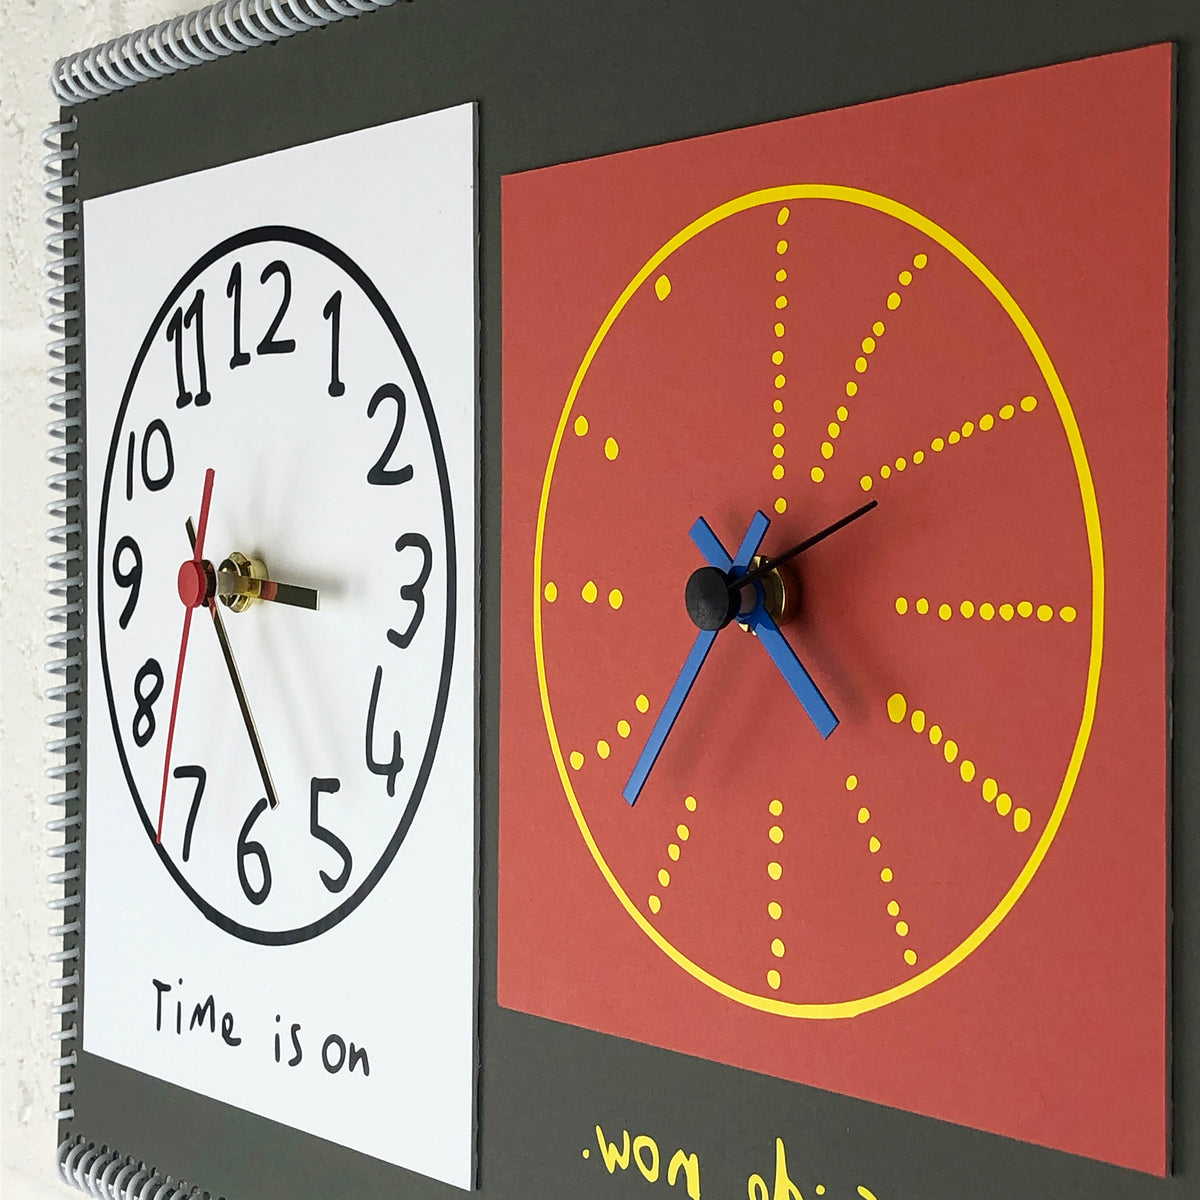 Time is on my side now” double wall clock (2nd generation #009 